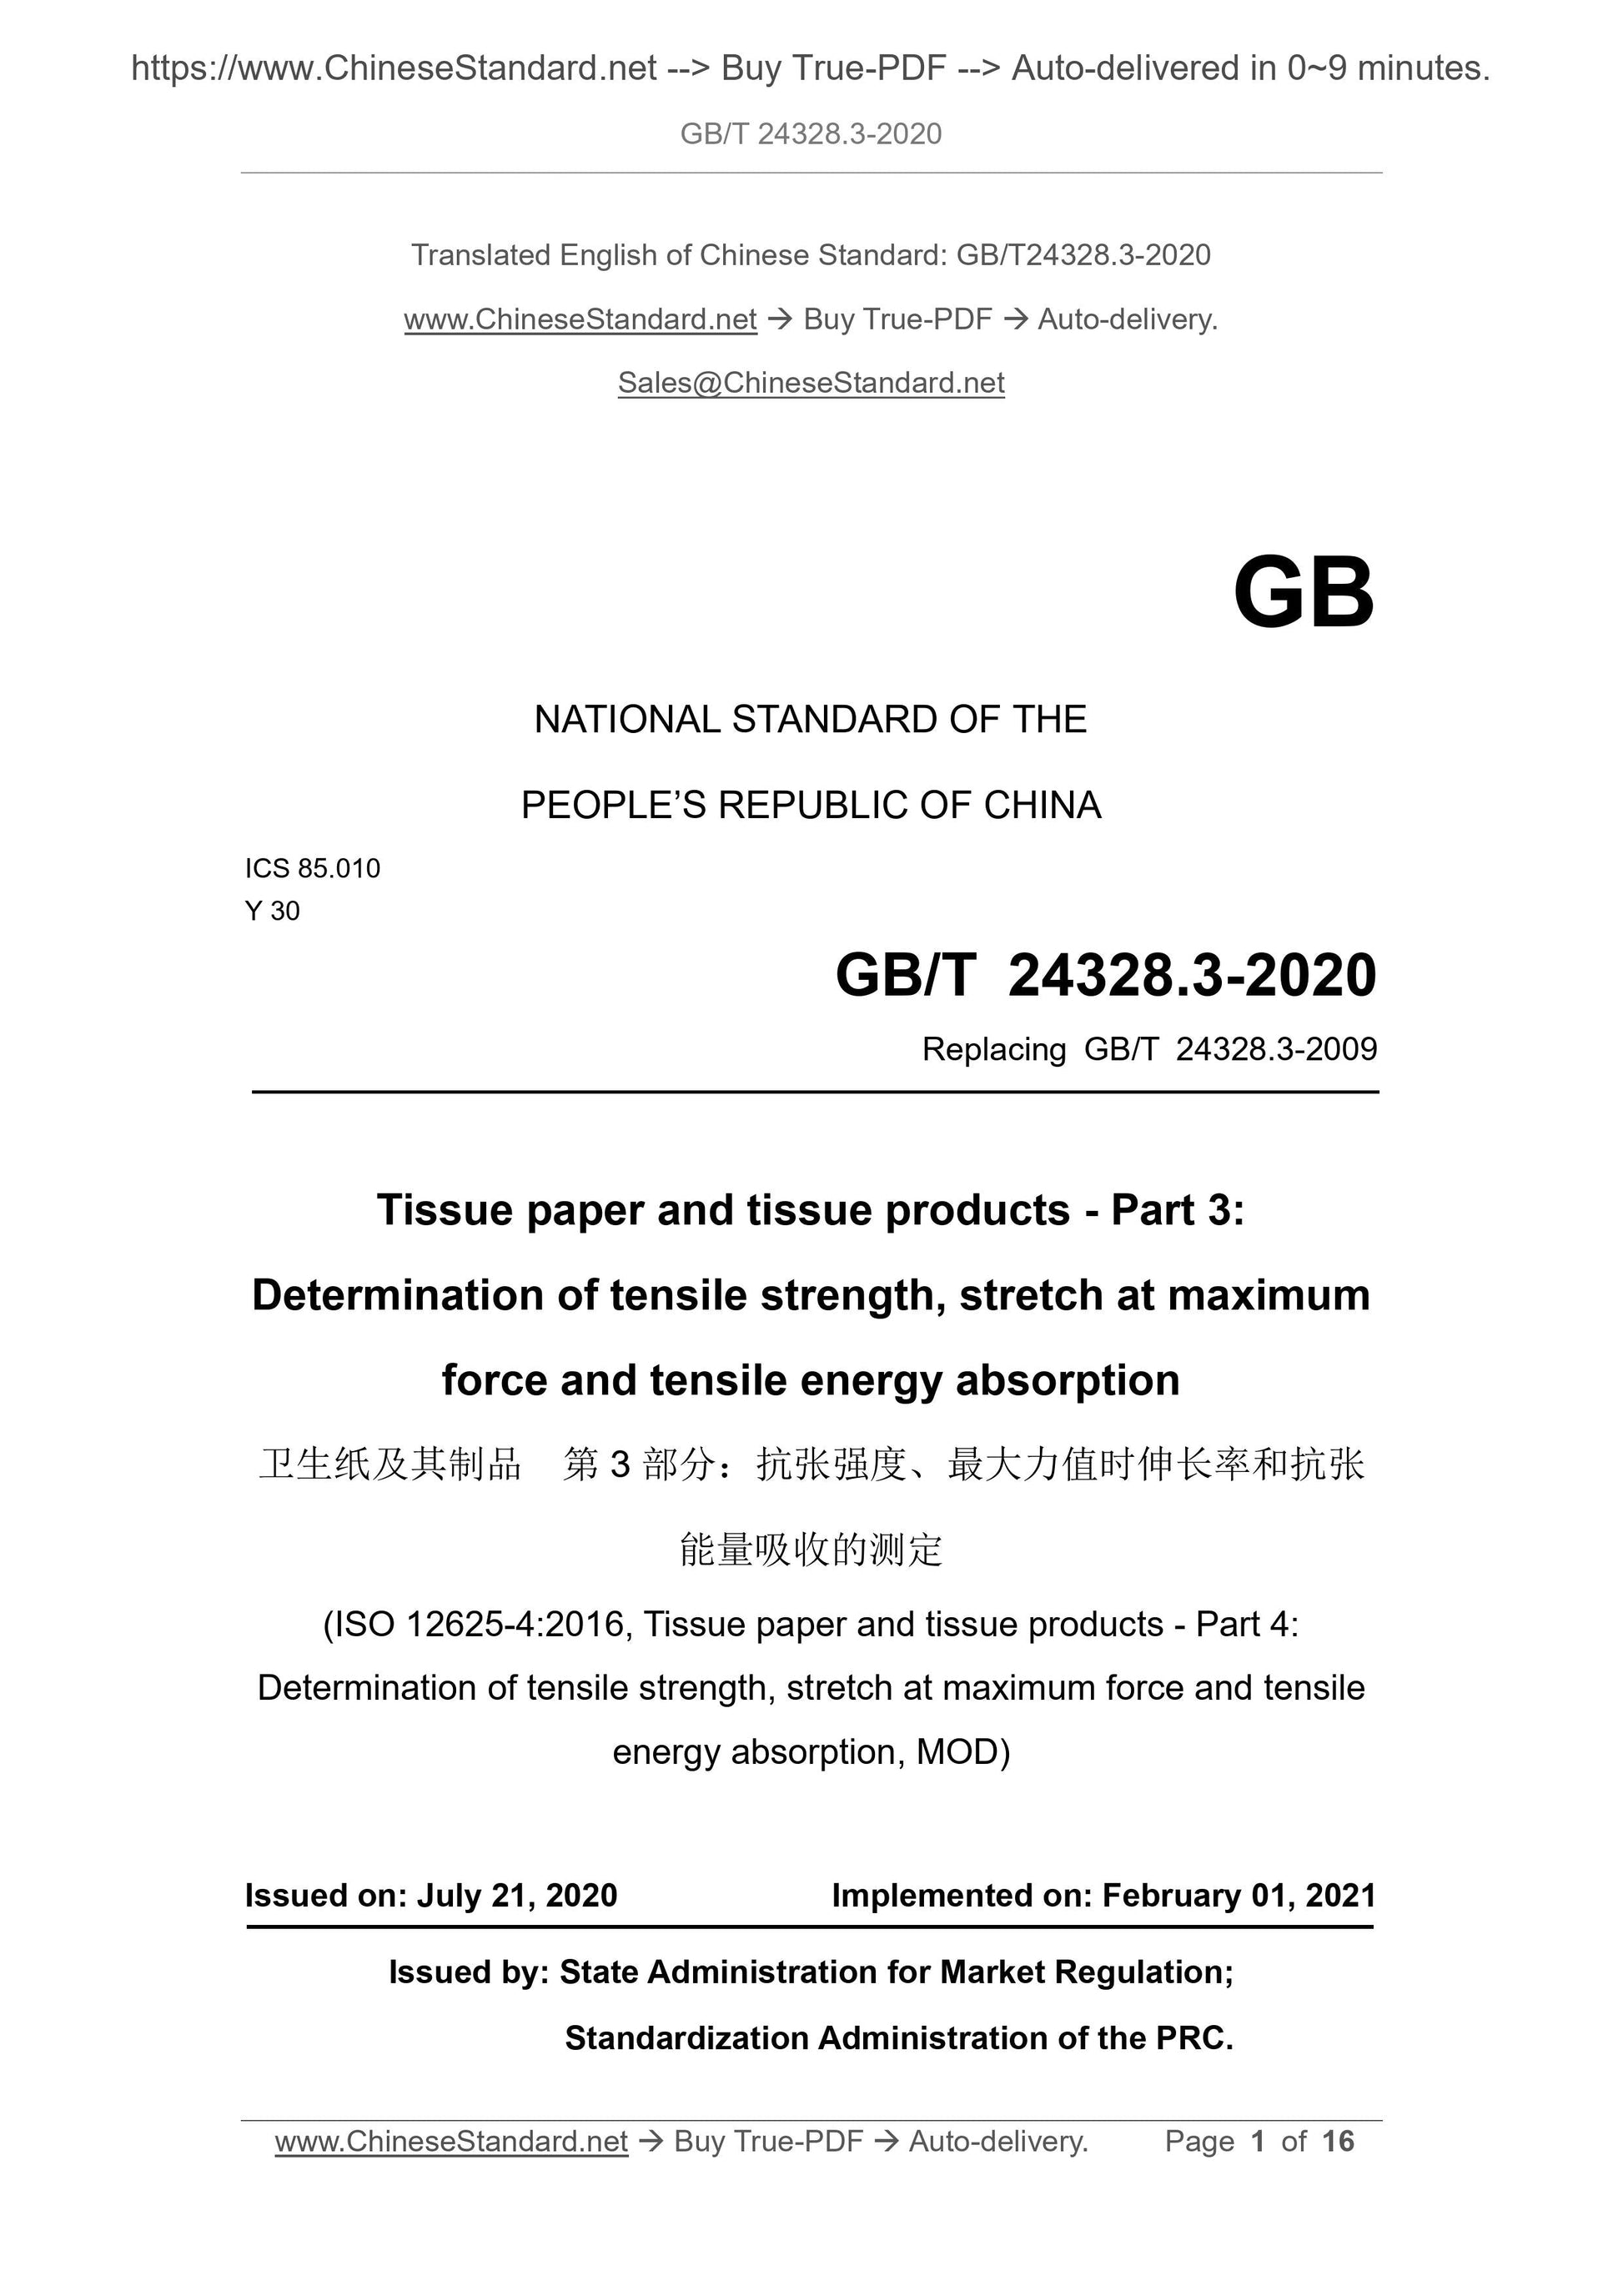 GB/T 24328.3-2020 Page 1